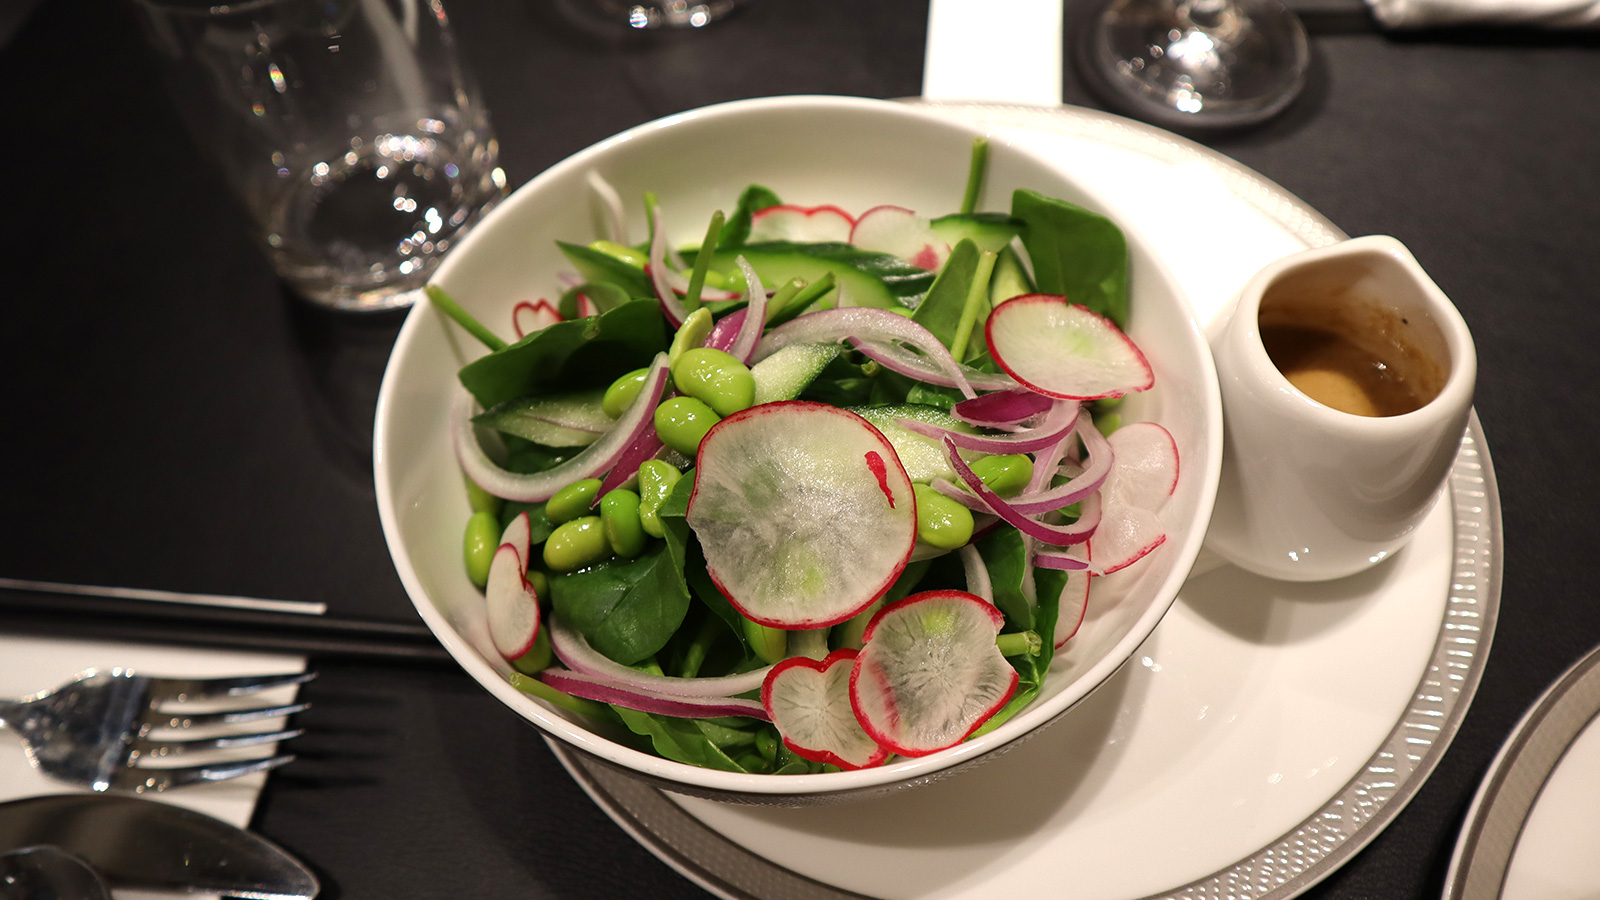 Japanese edamame salad in the Singapore Airlines SilverKris First Class Lounge, Melbourne